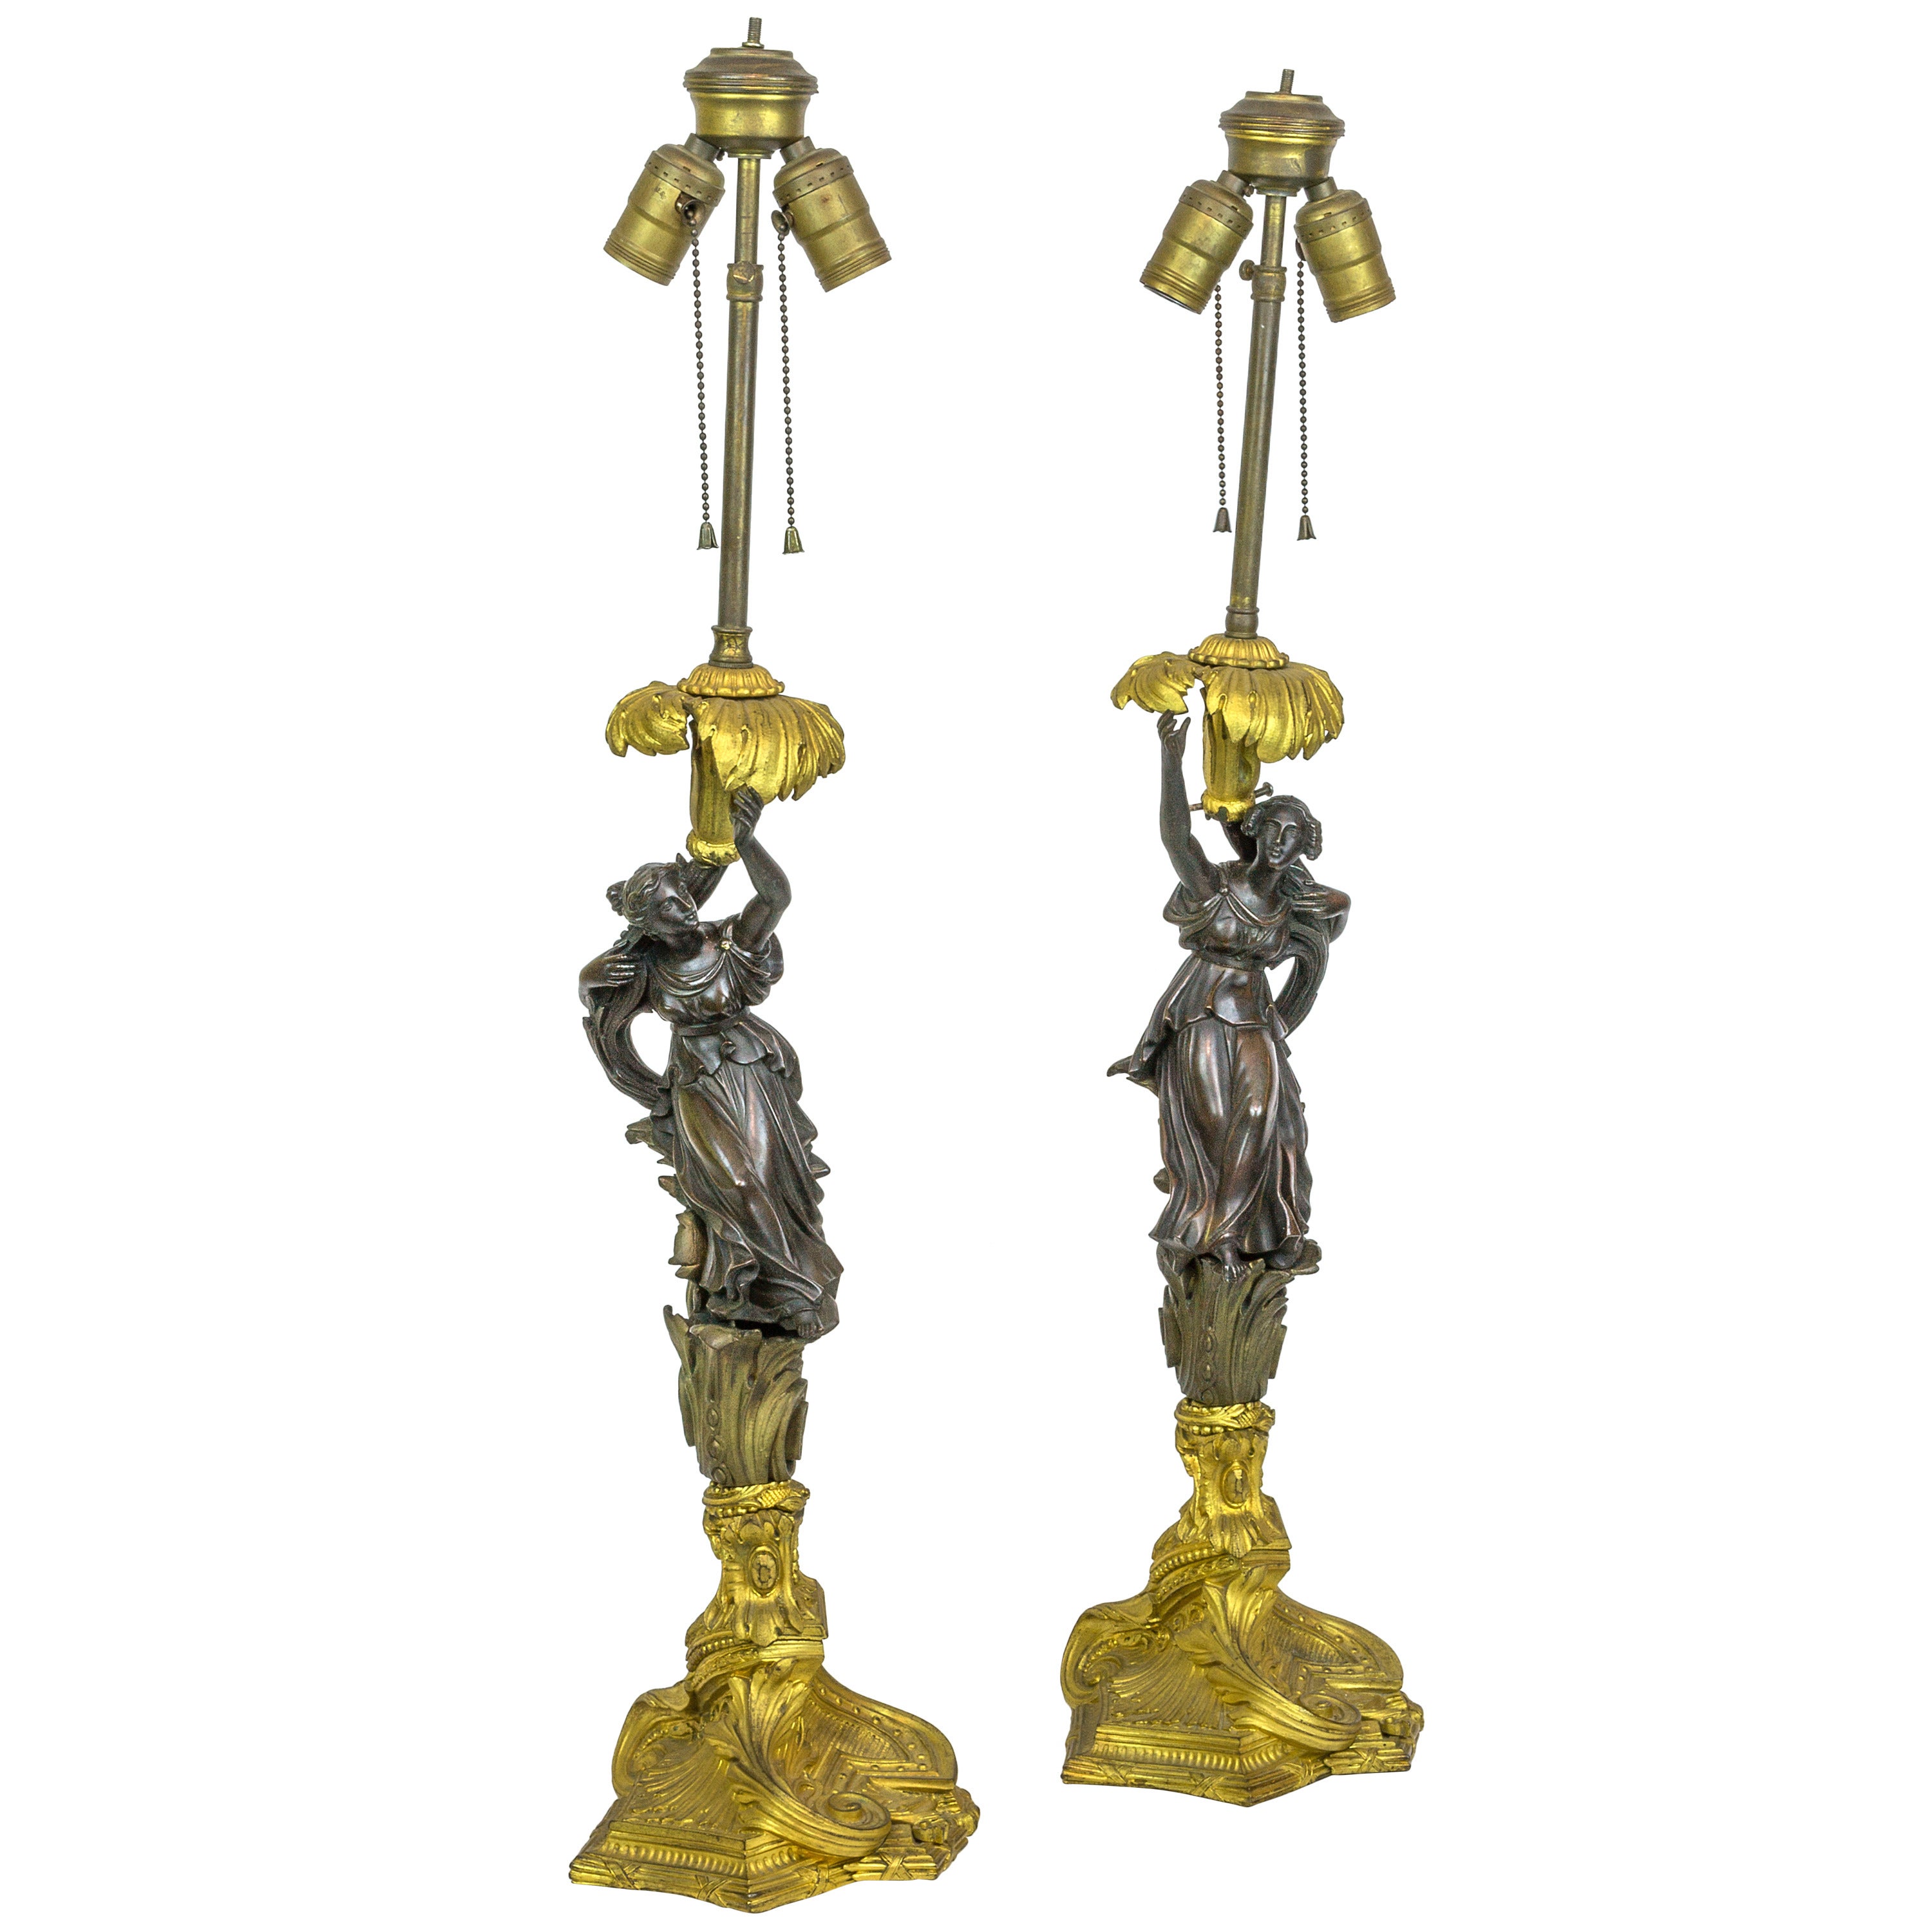 Pair of Patinated and Gilt Bronze Figural Candlestick Lamps